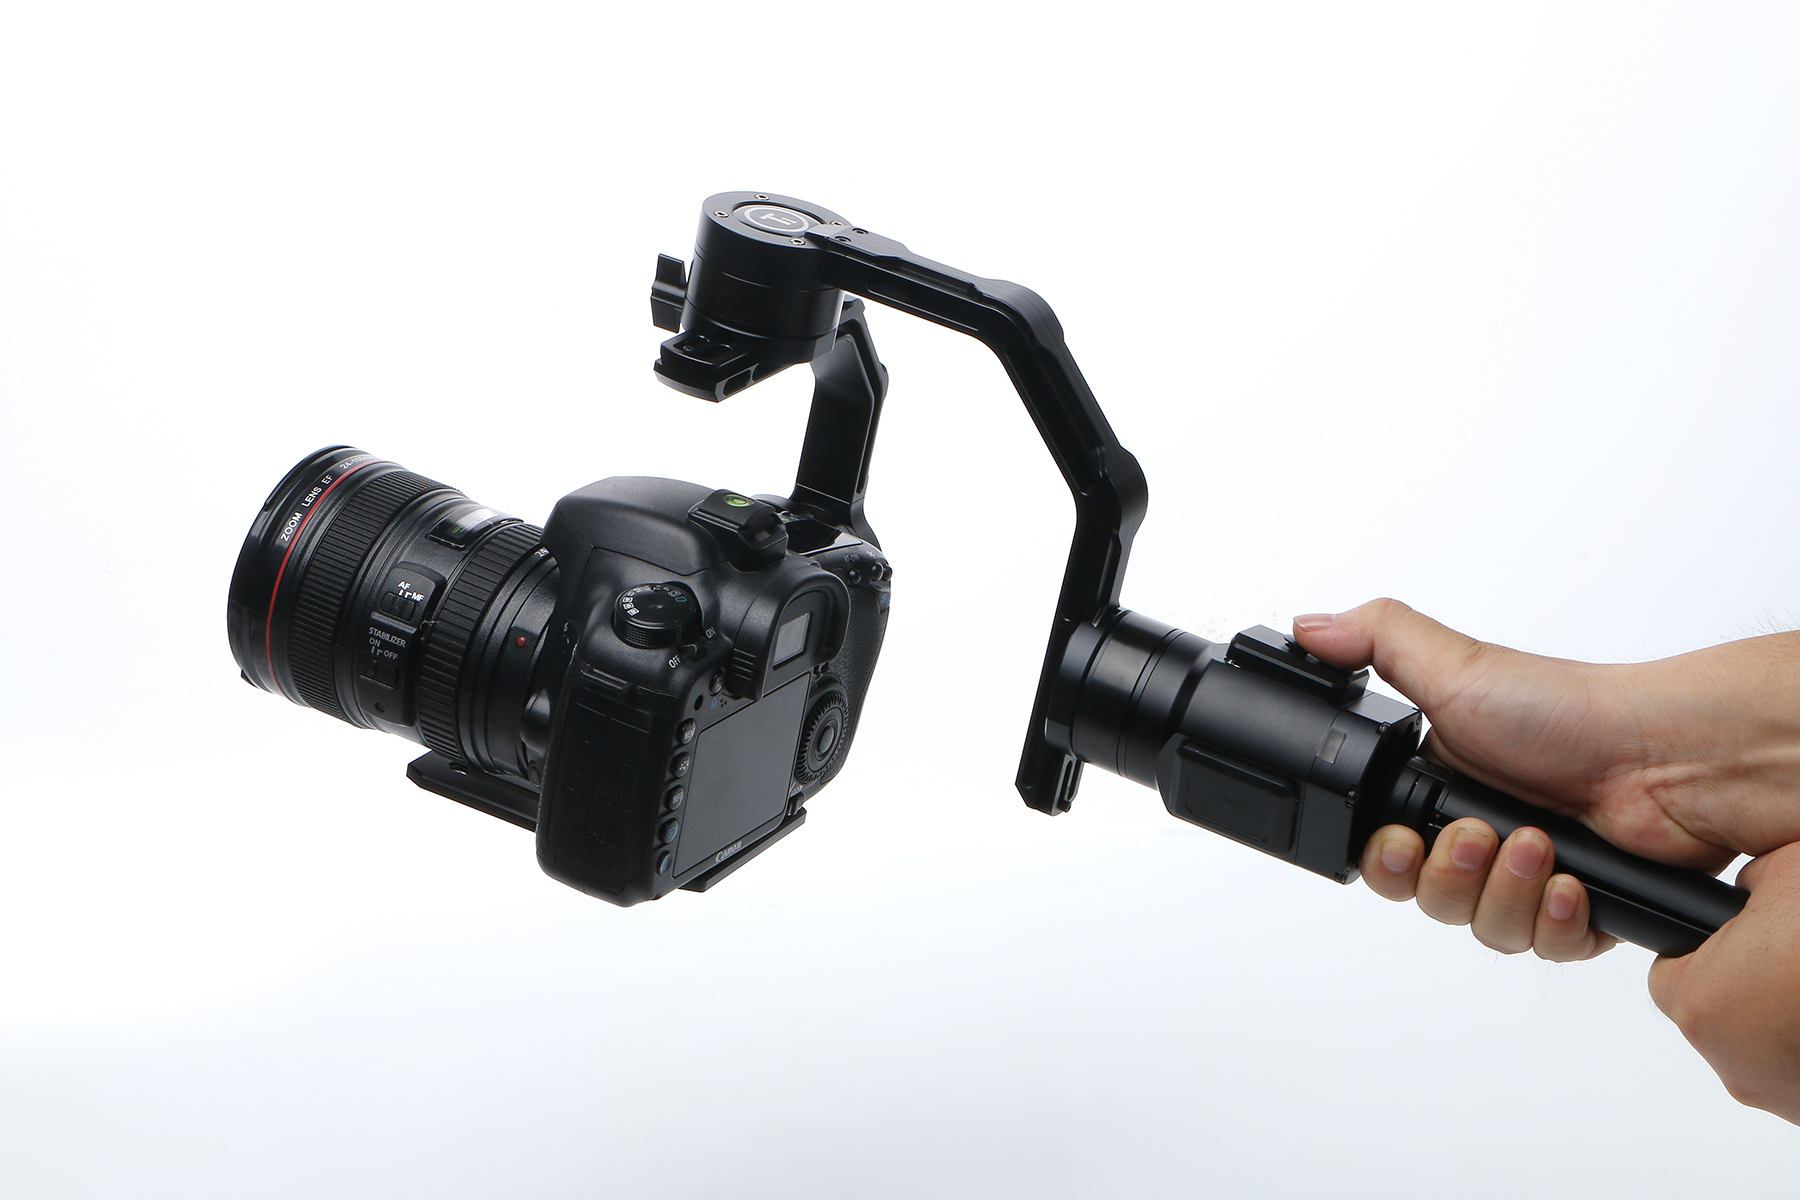 3-Axis encoder Gimbal Handheld Stabilizer for small DSLR Camera - Click Image to Close